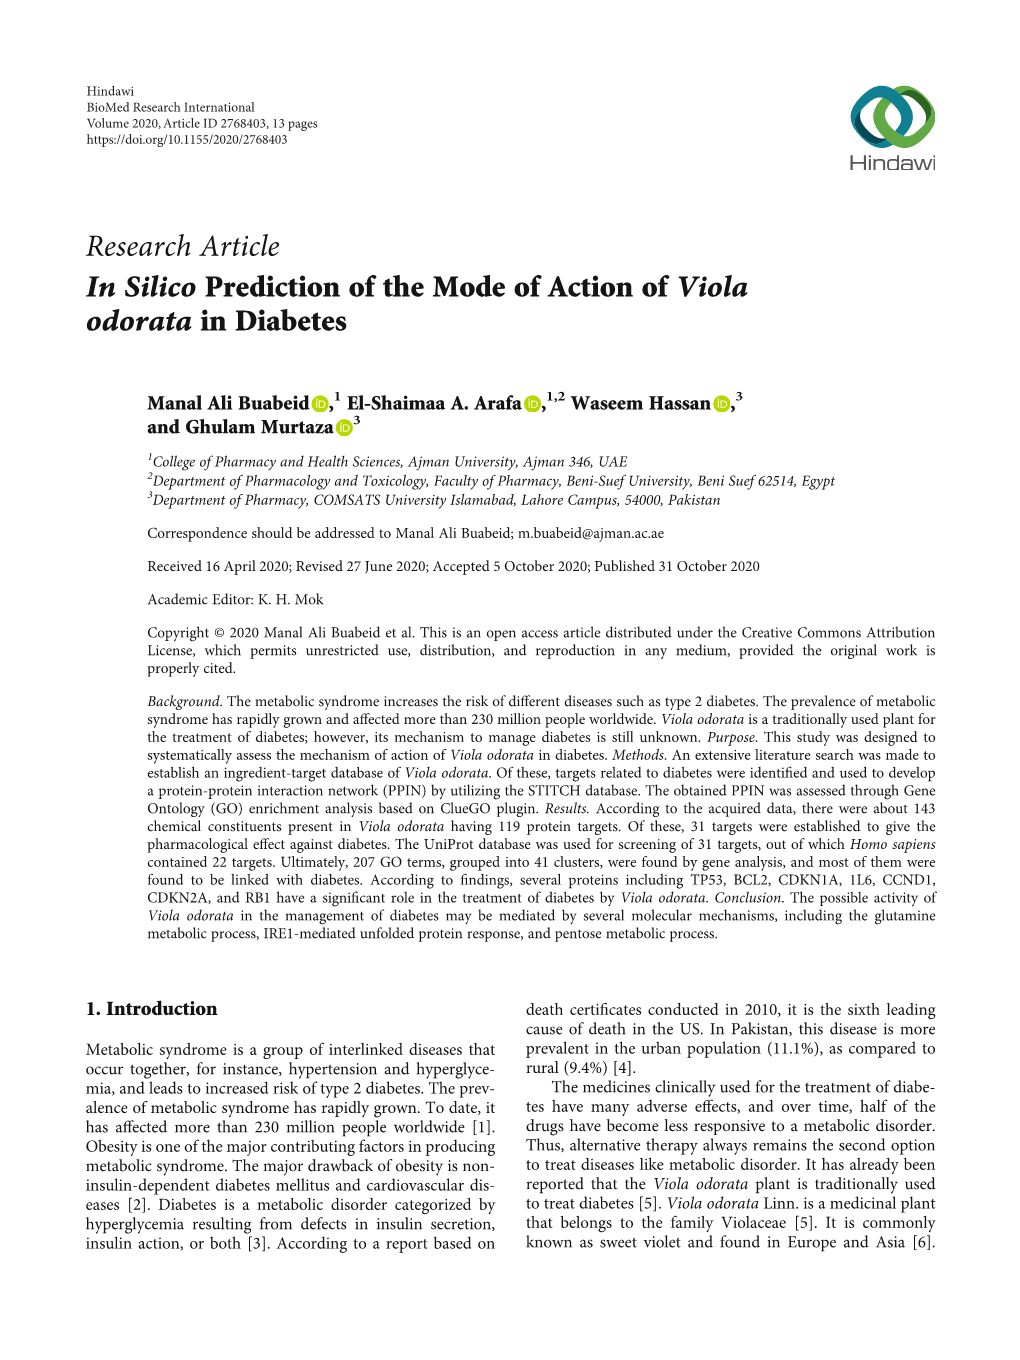 In Silico Prediction of the Mode of Action of Viola Odorata in Diabetes